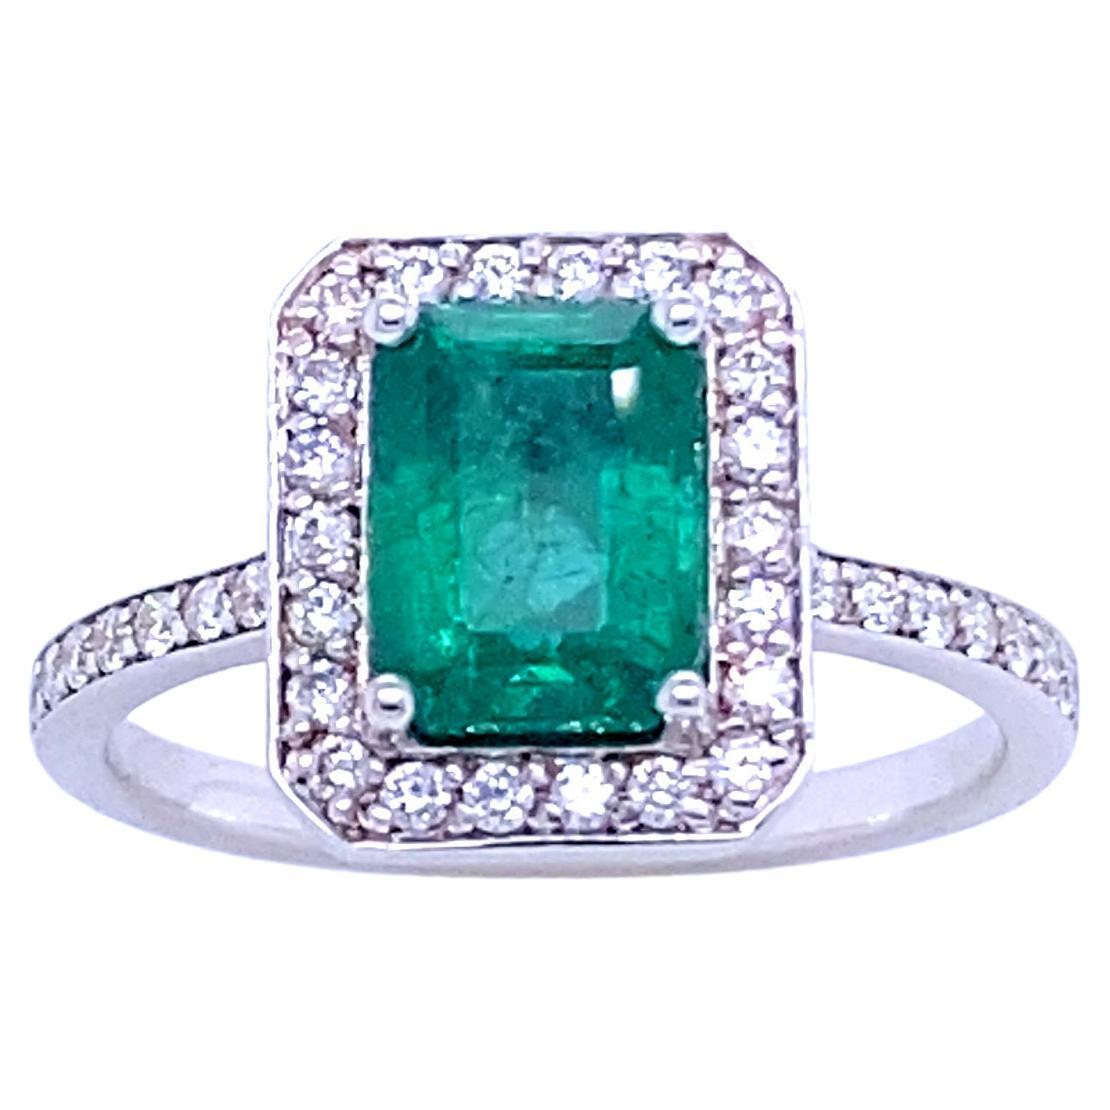 Welcome to Mesure et Art du Temps, where we are delighted to present this superb Art Deco style ring adorned with a magnificent RPC-cut emerald of 1.66 carats, a French creation of unparalleled elegance and refinement.

This Art Deco style ring is